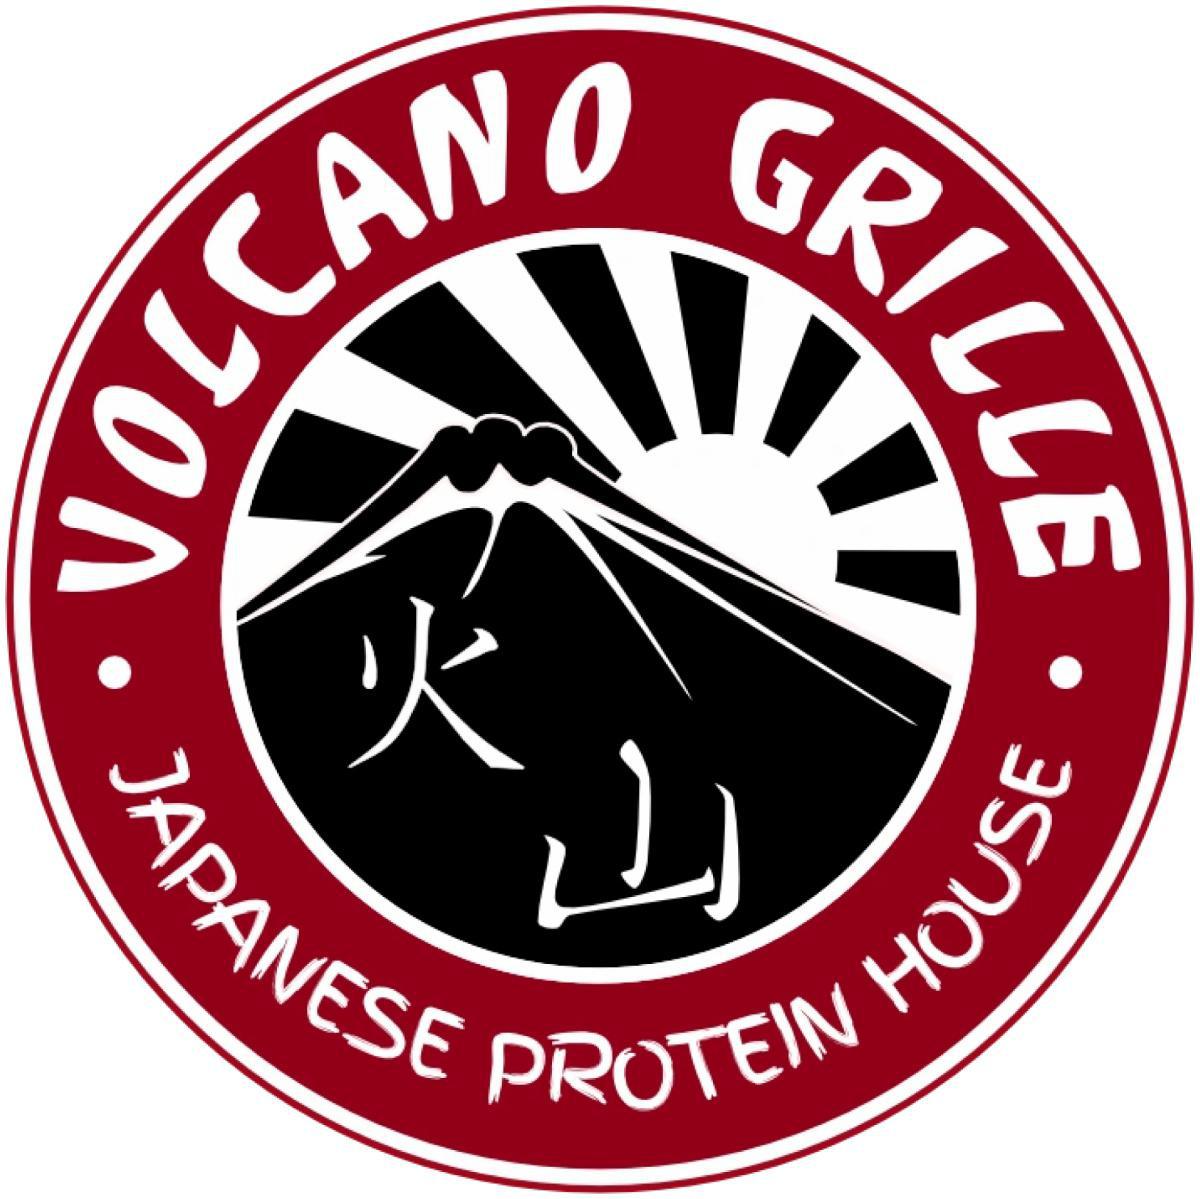 Volcano Grille